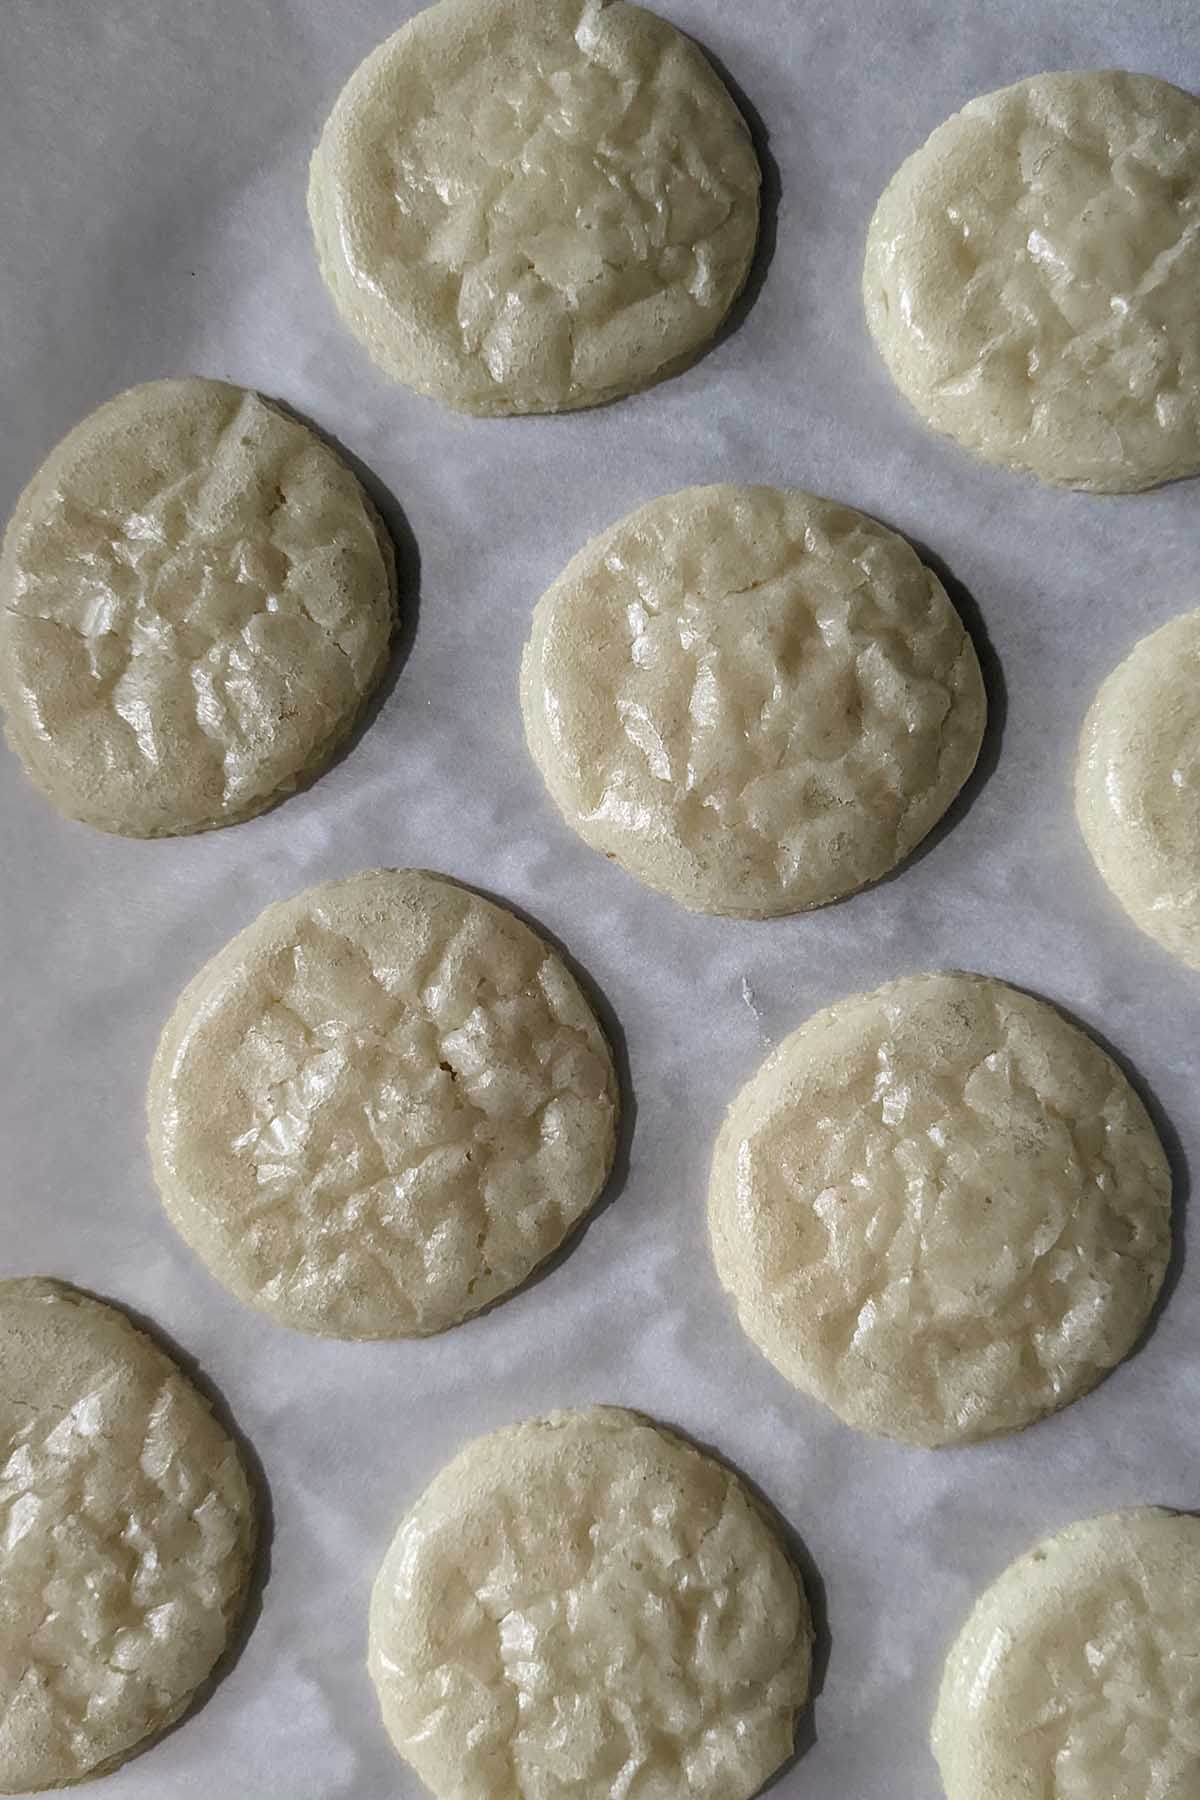 white colored wrinkly macaron shells.